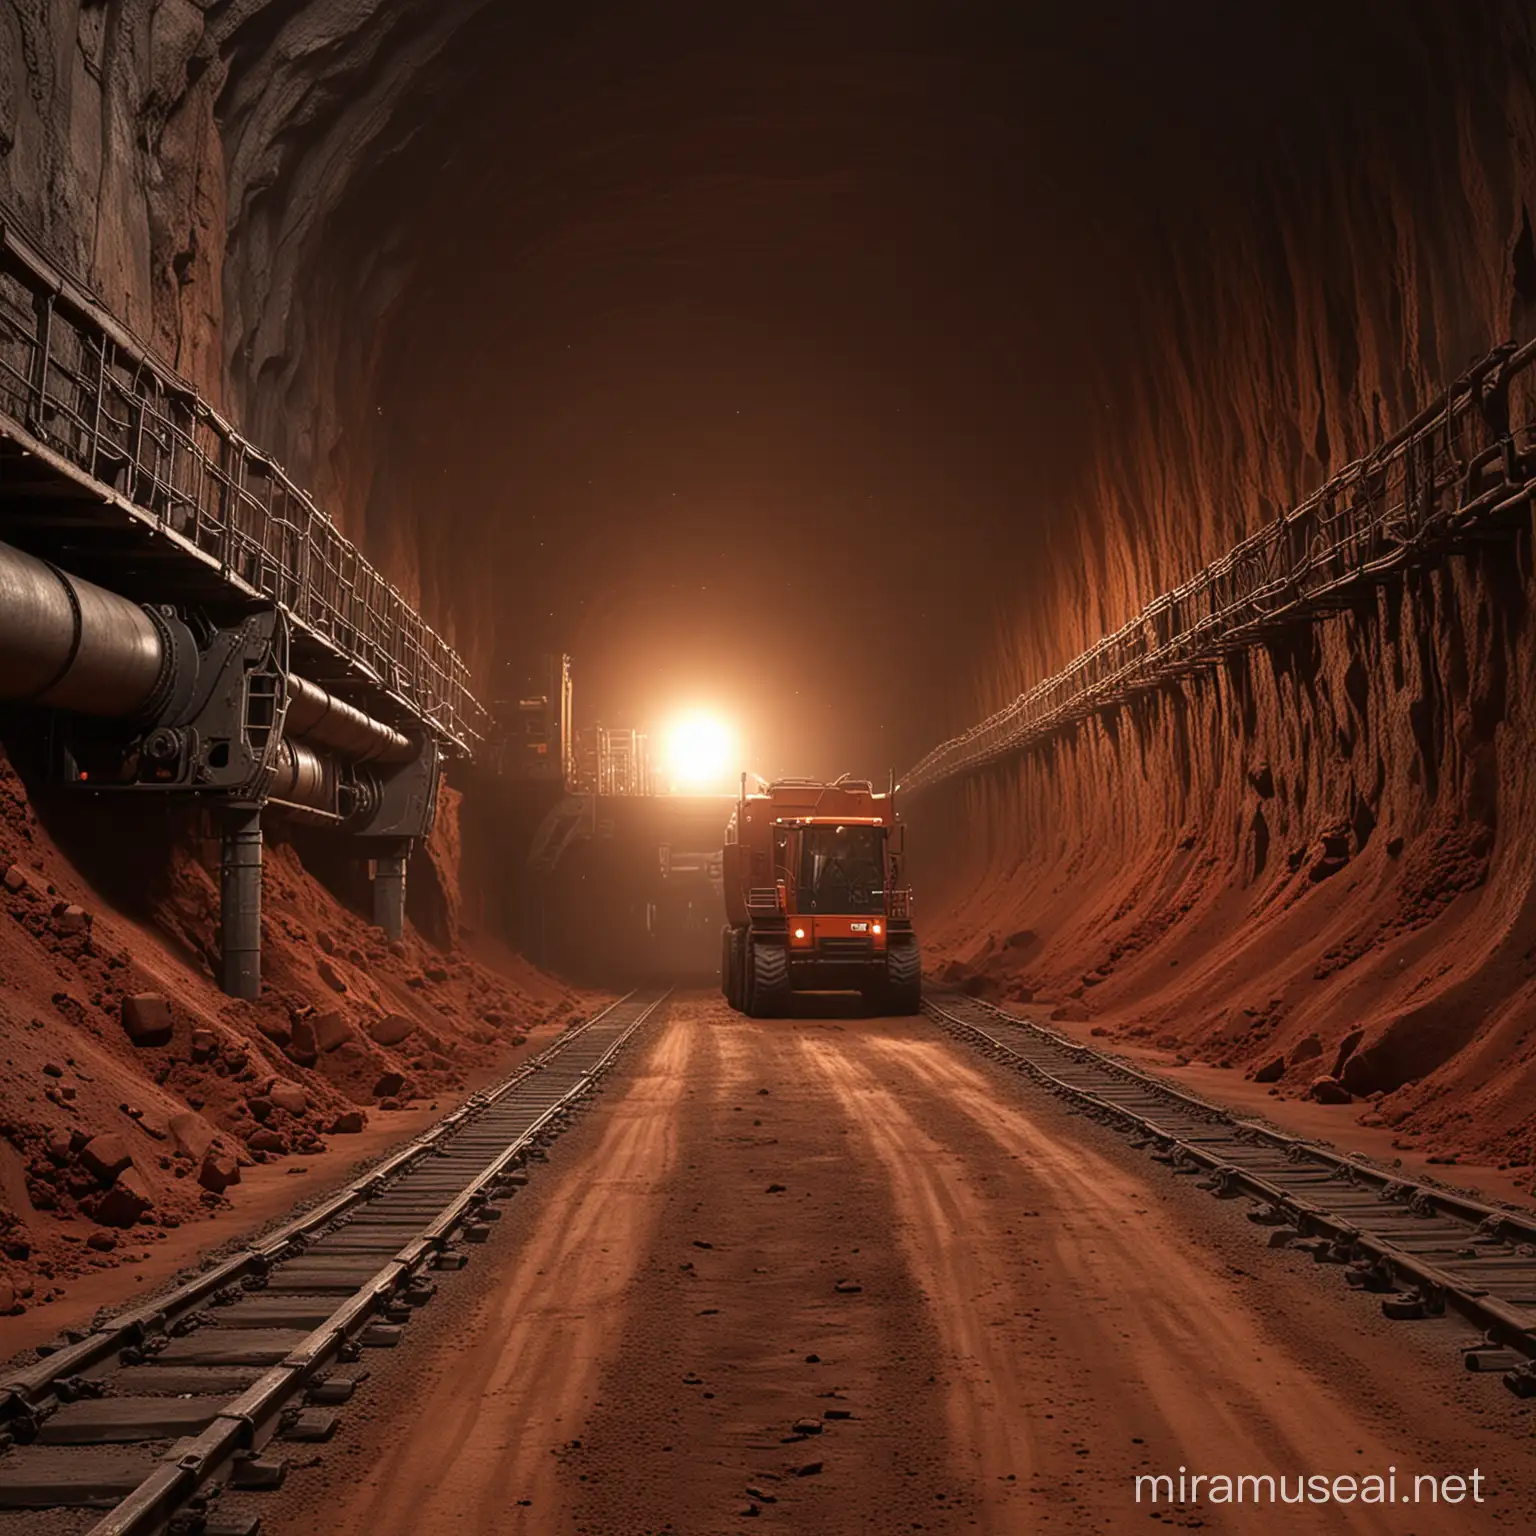 prompt: create an enormous and dark tunnel being created by a huge mining drill tunnel-making vehicle, as it bores the tunnel the red Mards dirt is pushed out the back on conveyor belts to vehicles, faint lights from the mining drill illuminate the tight environment. Ultra-realistic fantasy scene
